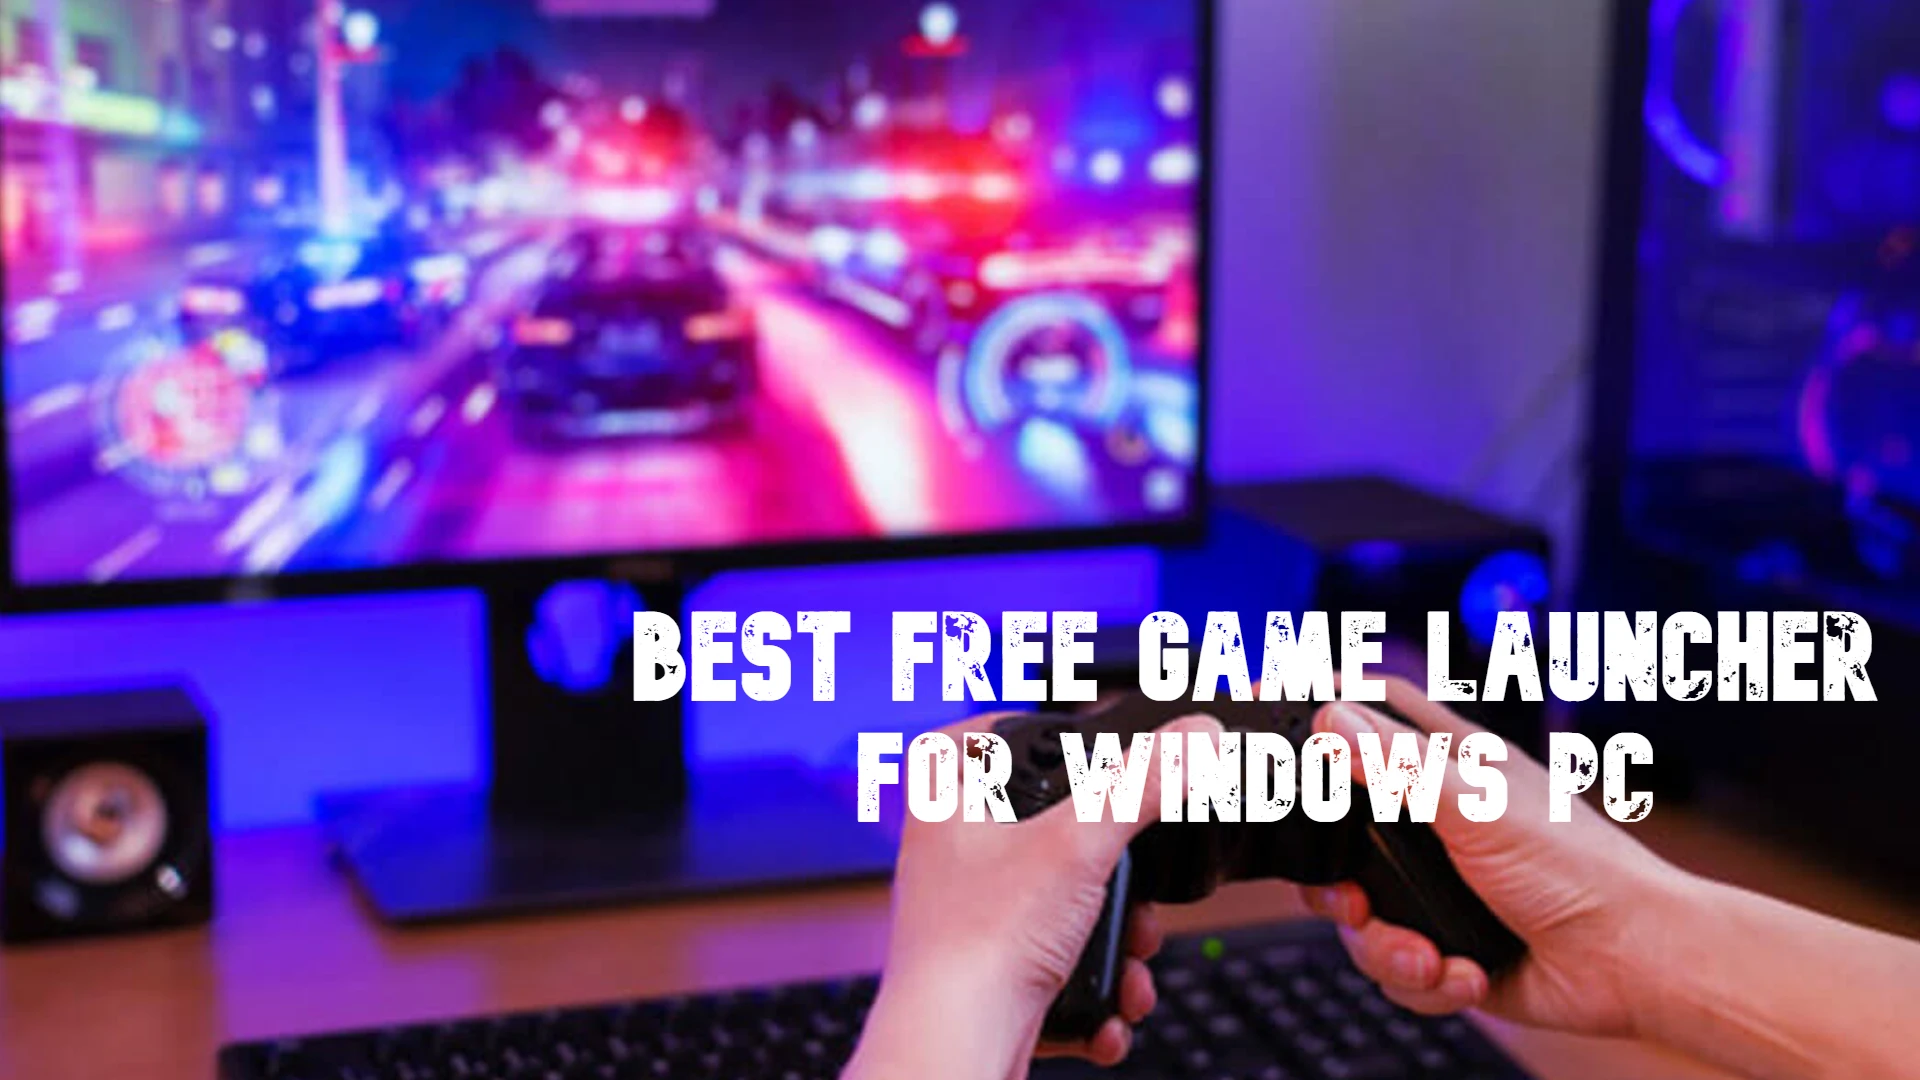 Best Free Game Launcher for Windows PC